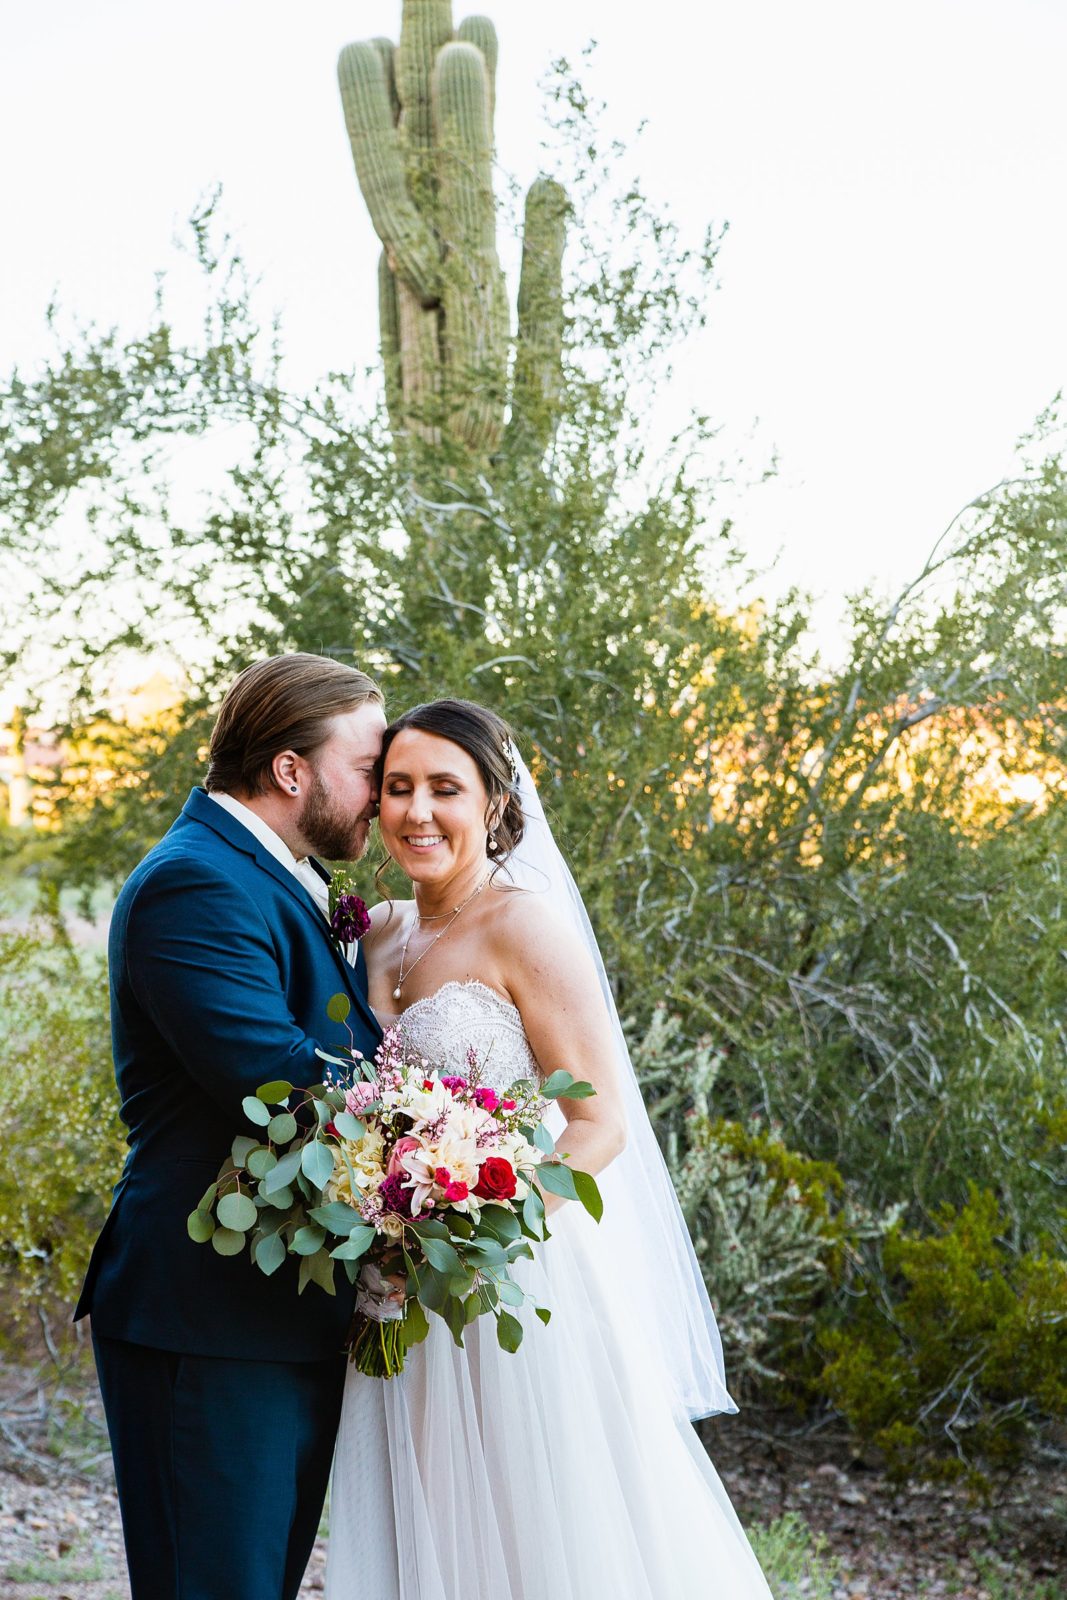 Bride and Groom share an intimate moment at their Arizona Heritage Center at Papago Park wedding by Arizona wedding photographer PMA Photography.